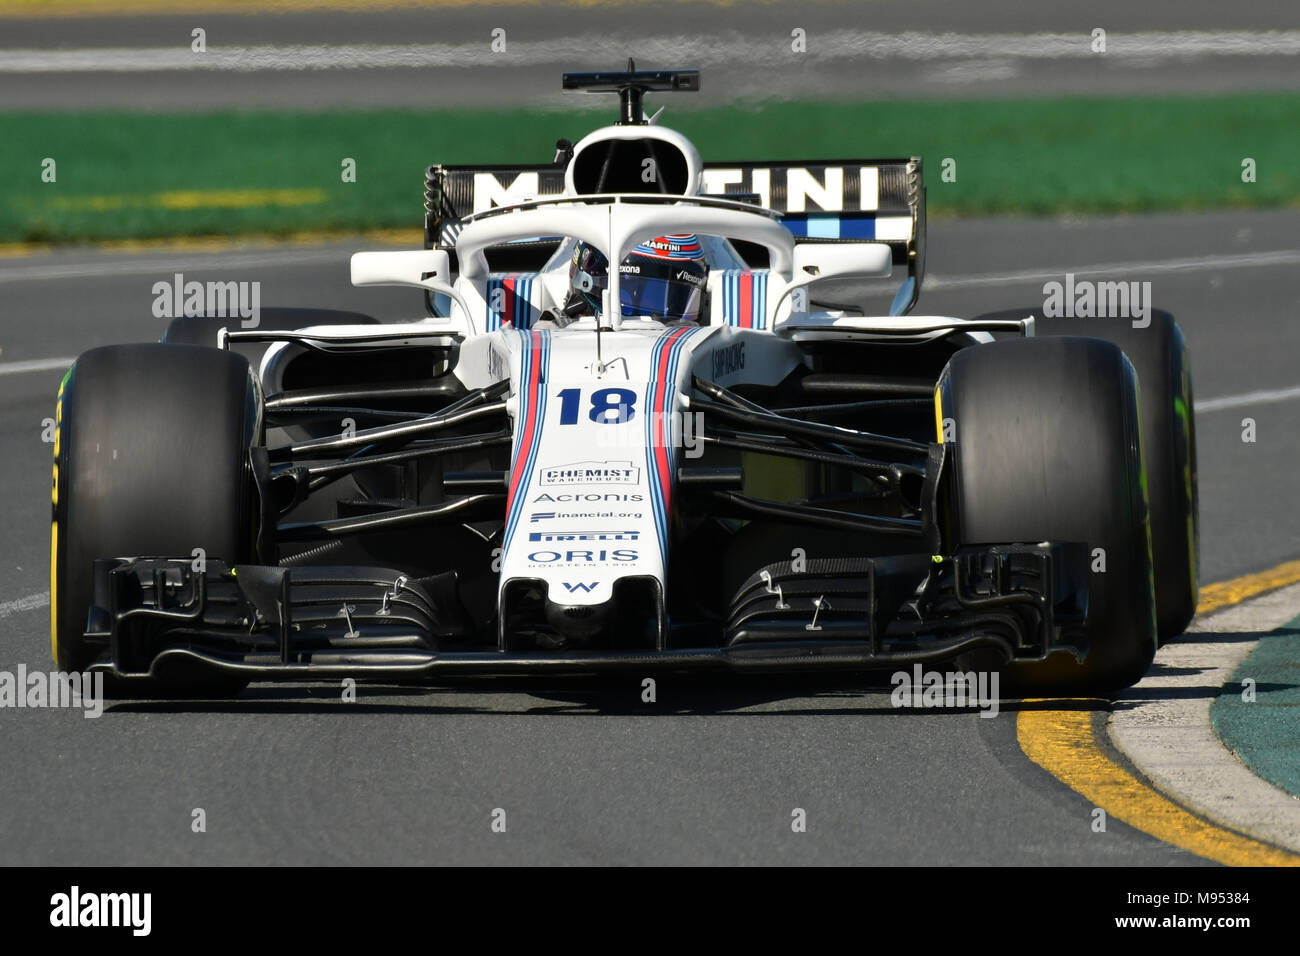 Albert Park, Melbourne, Australia. 23rd Mar, 2018. Lance Stroll (CAN) #18 from the Williams Martini Racing team during practice session one at the 2018 Australian Formula One Grand Prix at Albert Park, Melbourne, Australia. Sydney Low/Cal Sport Media/Alamy Live News Stock Photo